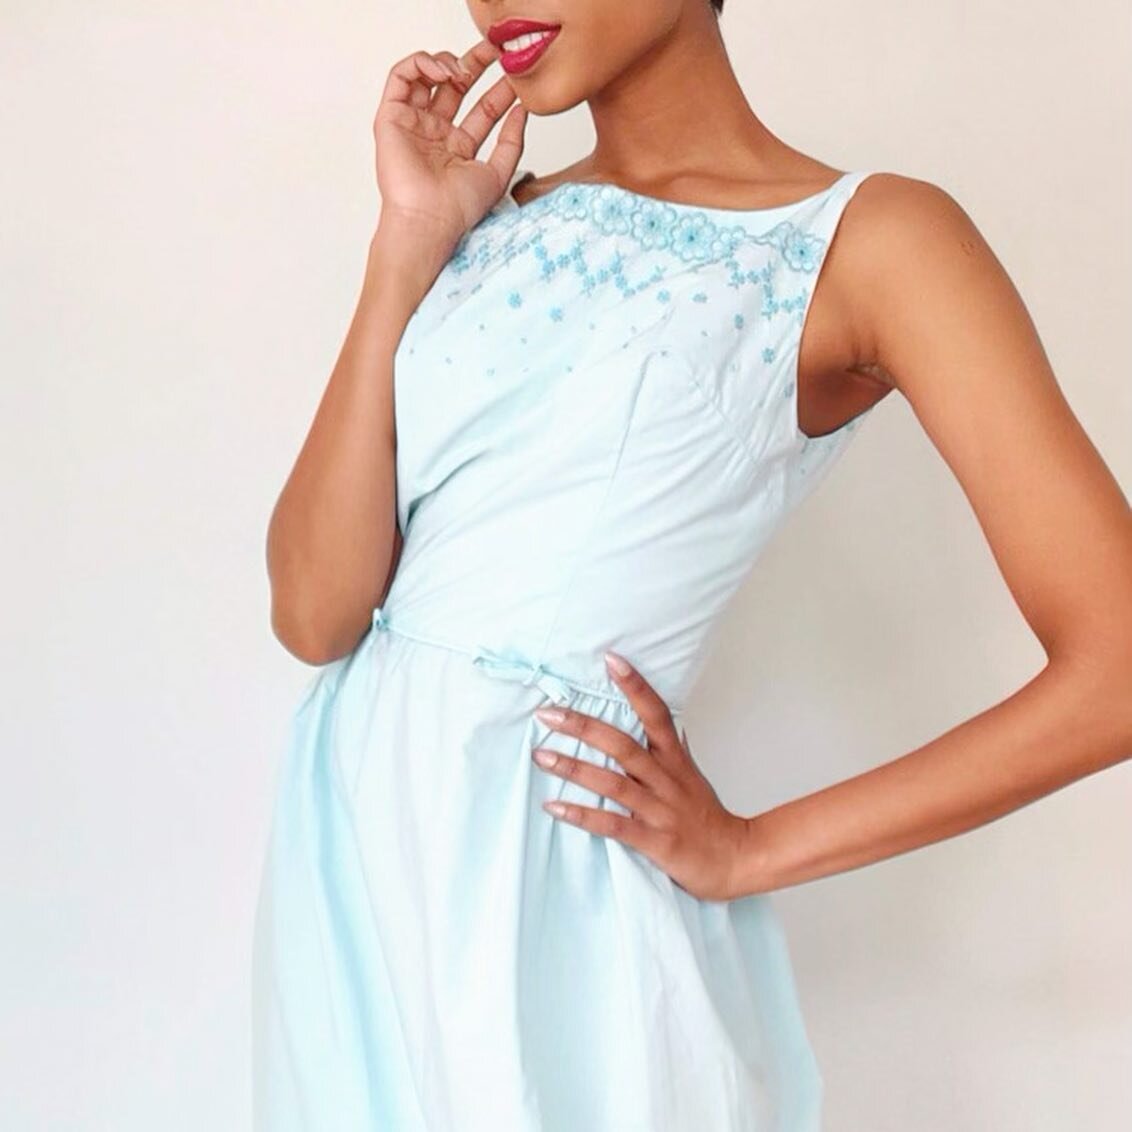 Oooft check out this sweet, baby blue, embroidered number 🕊👗 Going live on our website this Sunday, 6pm AEDT 
.
.

#1off #slowfashion #rewear #repeat #redo #remade #past #future #oneoffpieces #unique  #whomademyclothes #fashionrevolution #ethicalst